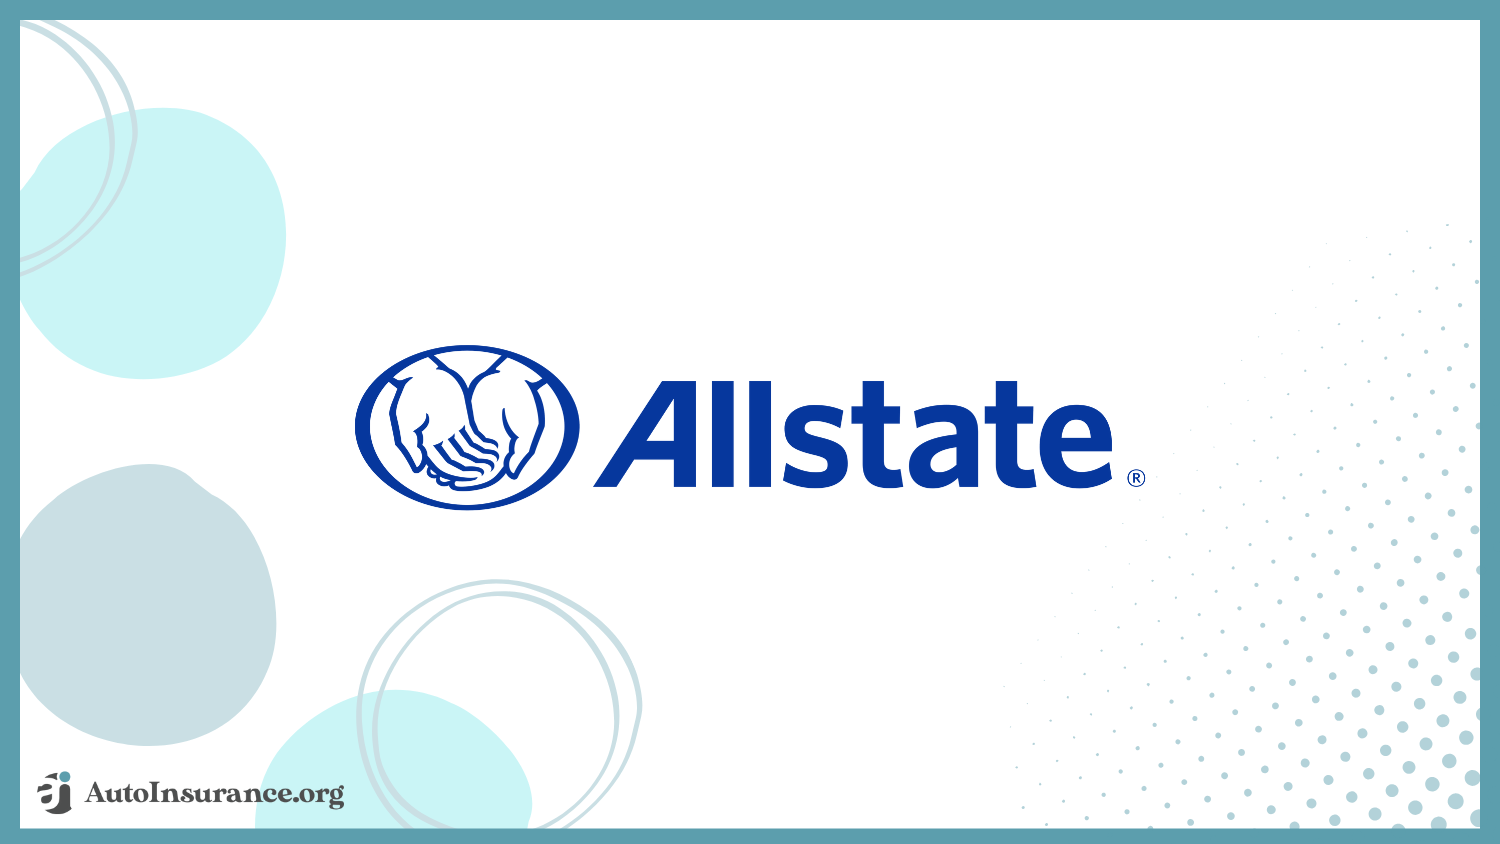 best auto insurance companies for cheap personal injury protection: Allstate